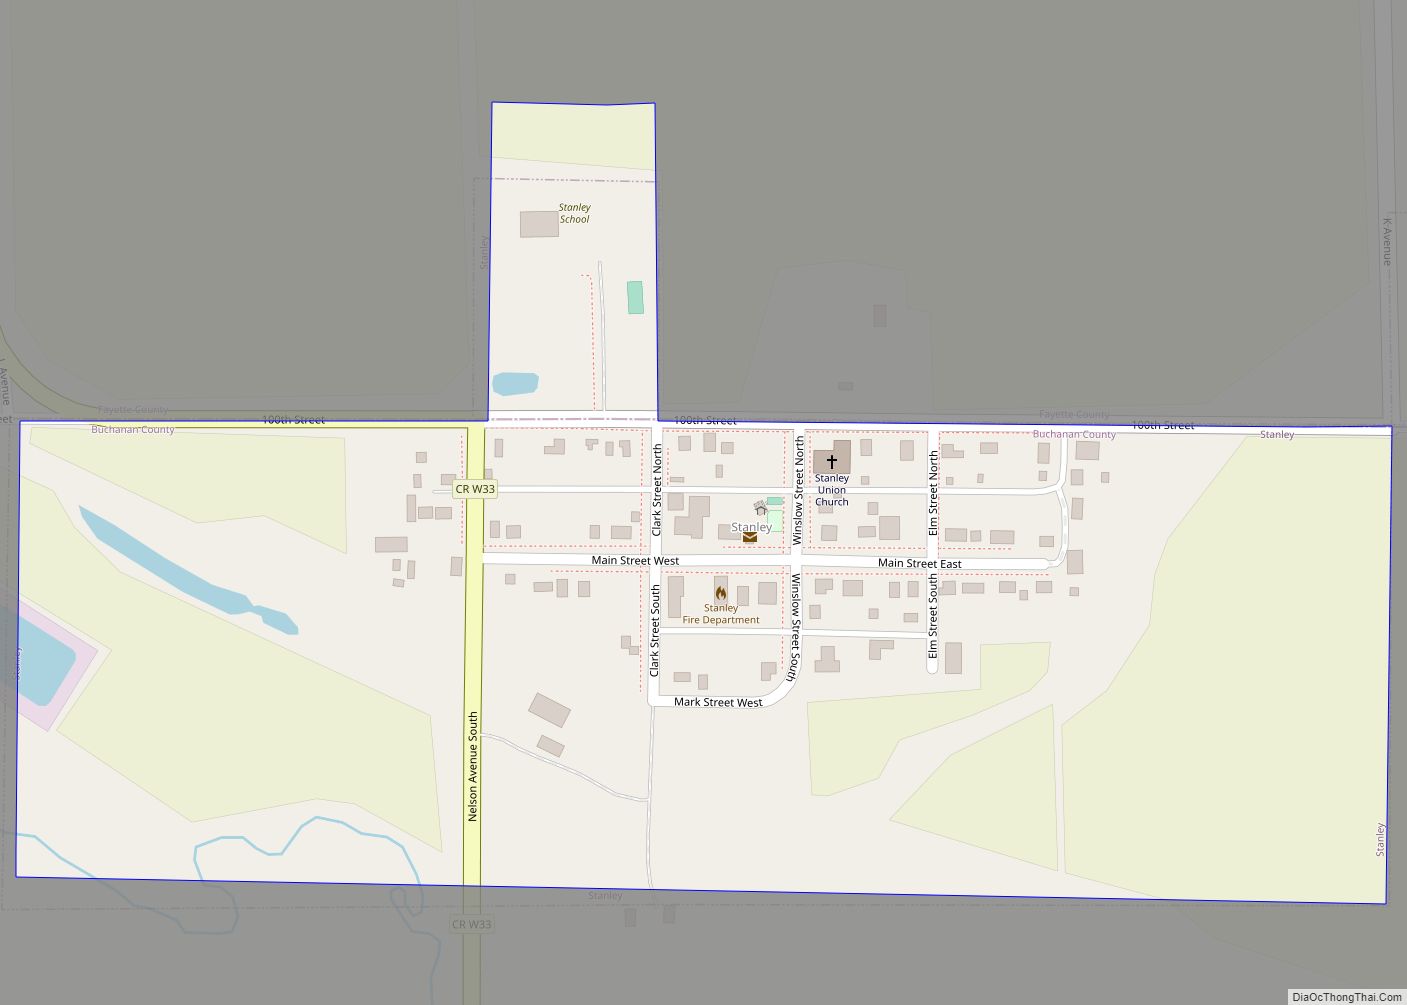 Map of Stanley city